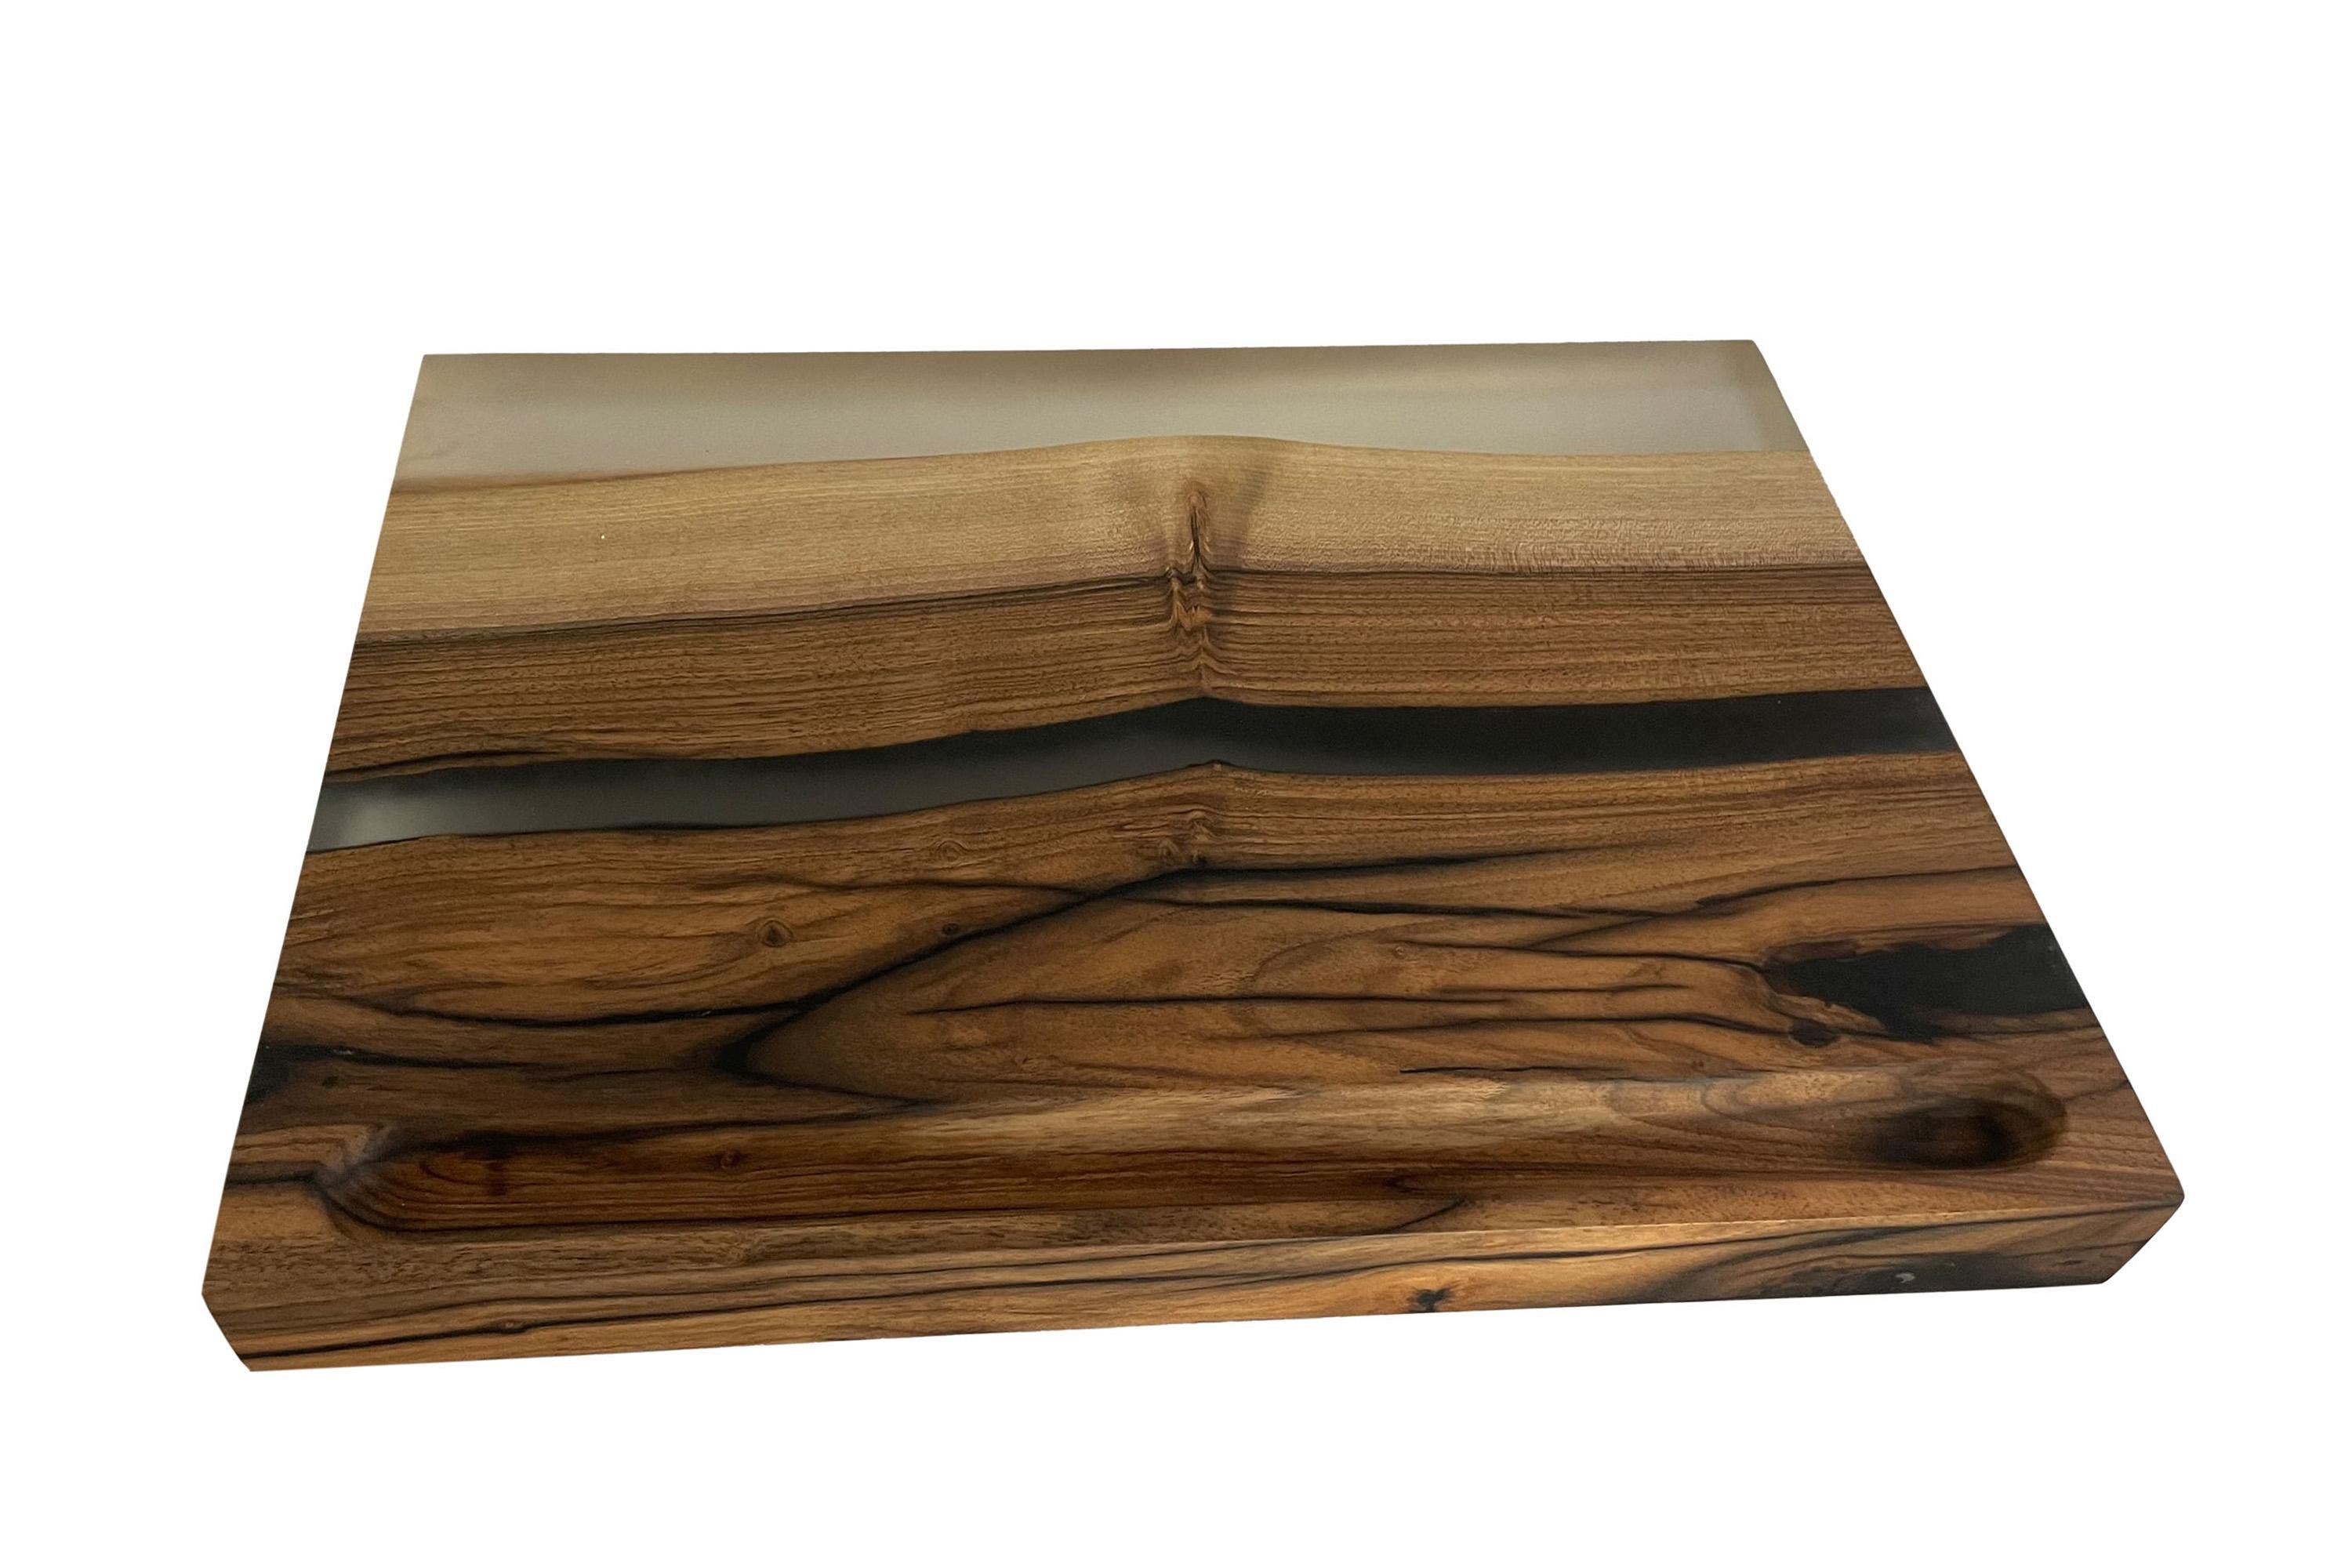 Carved Cutting board made of walnut and cast with epoxy For Sale